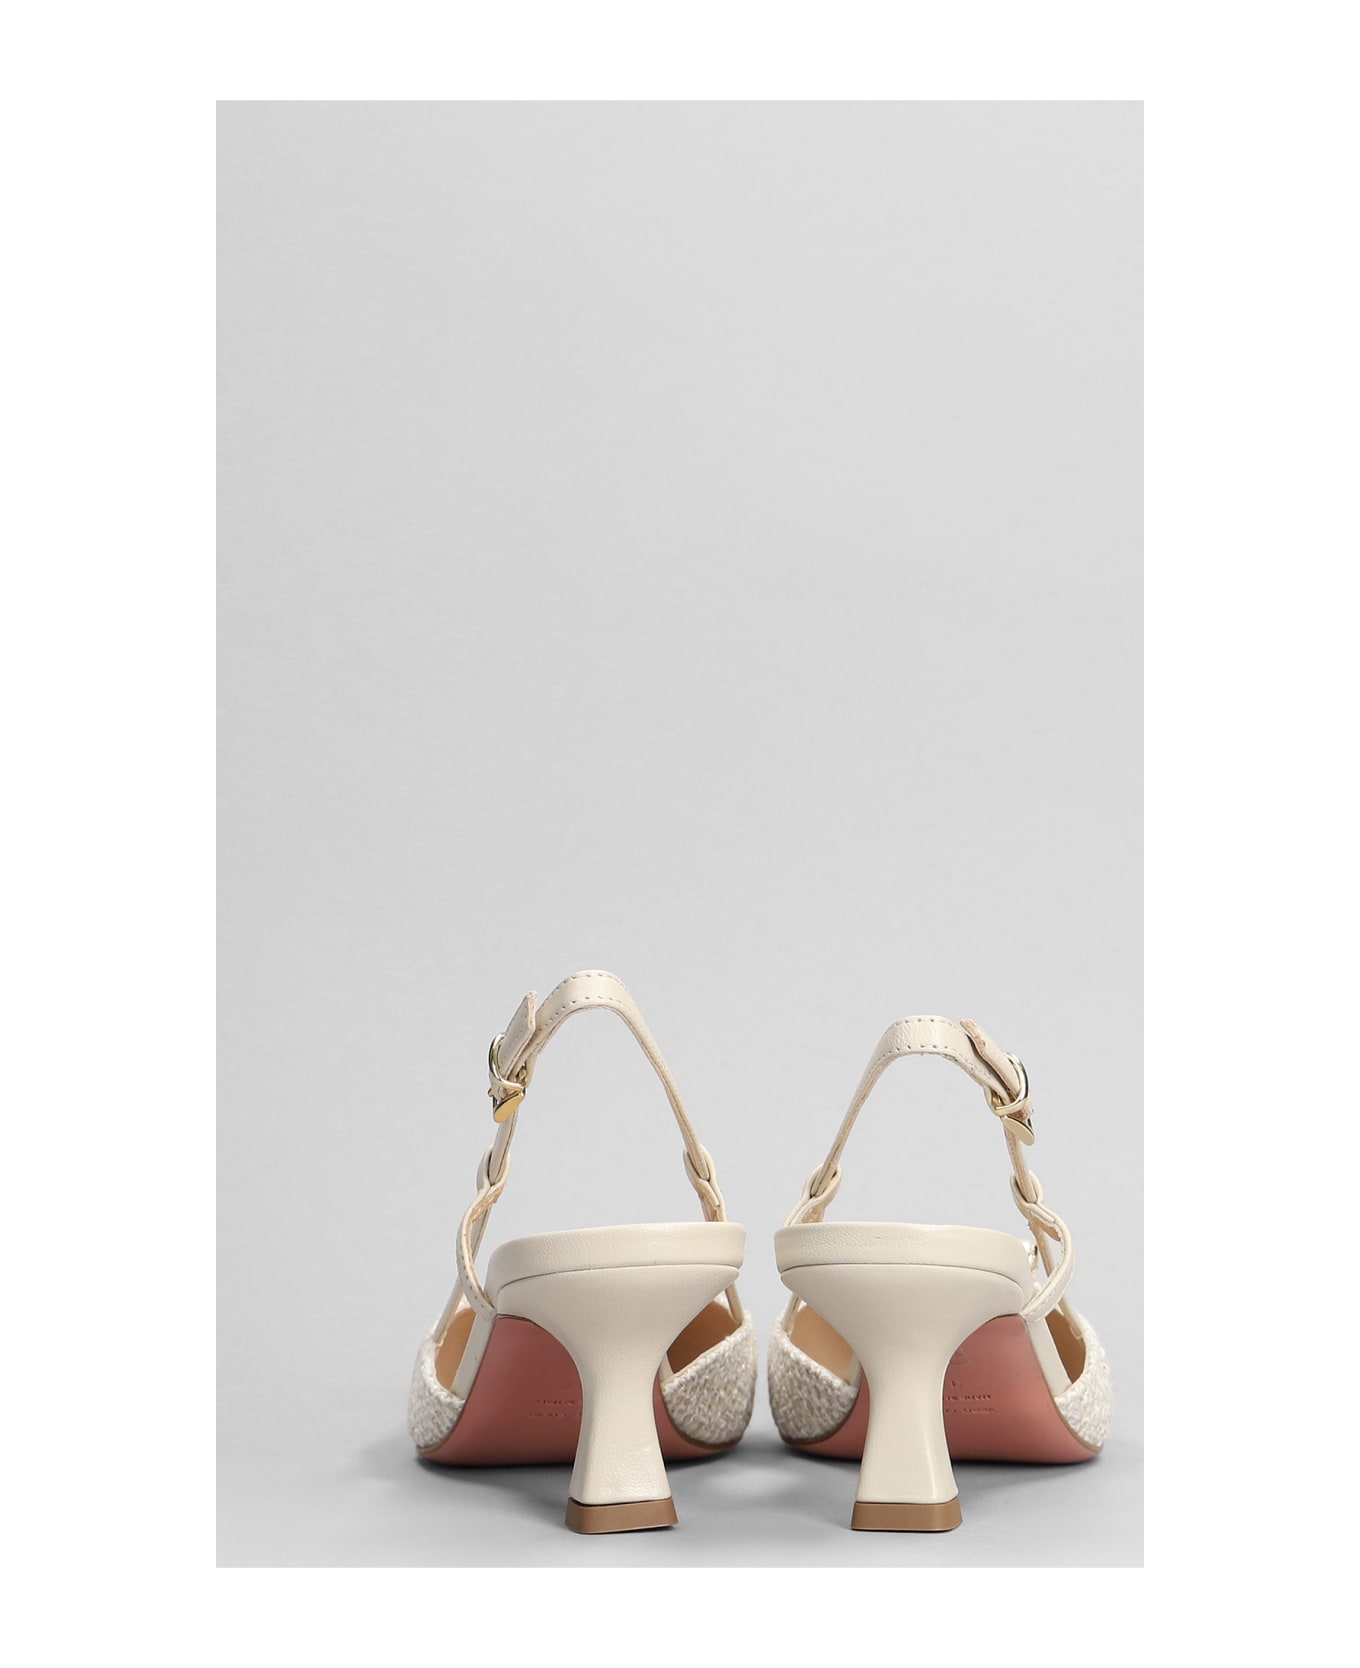 Roberto Festa Stefi Pumps In Beige Leather And Fabric - beige